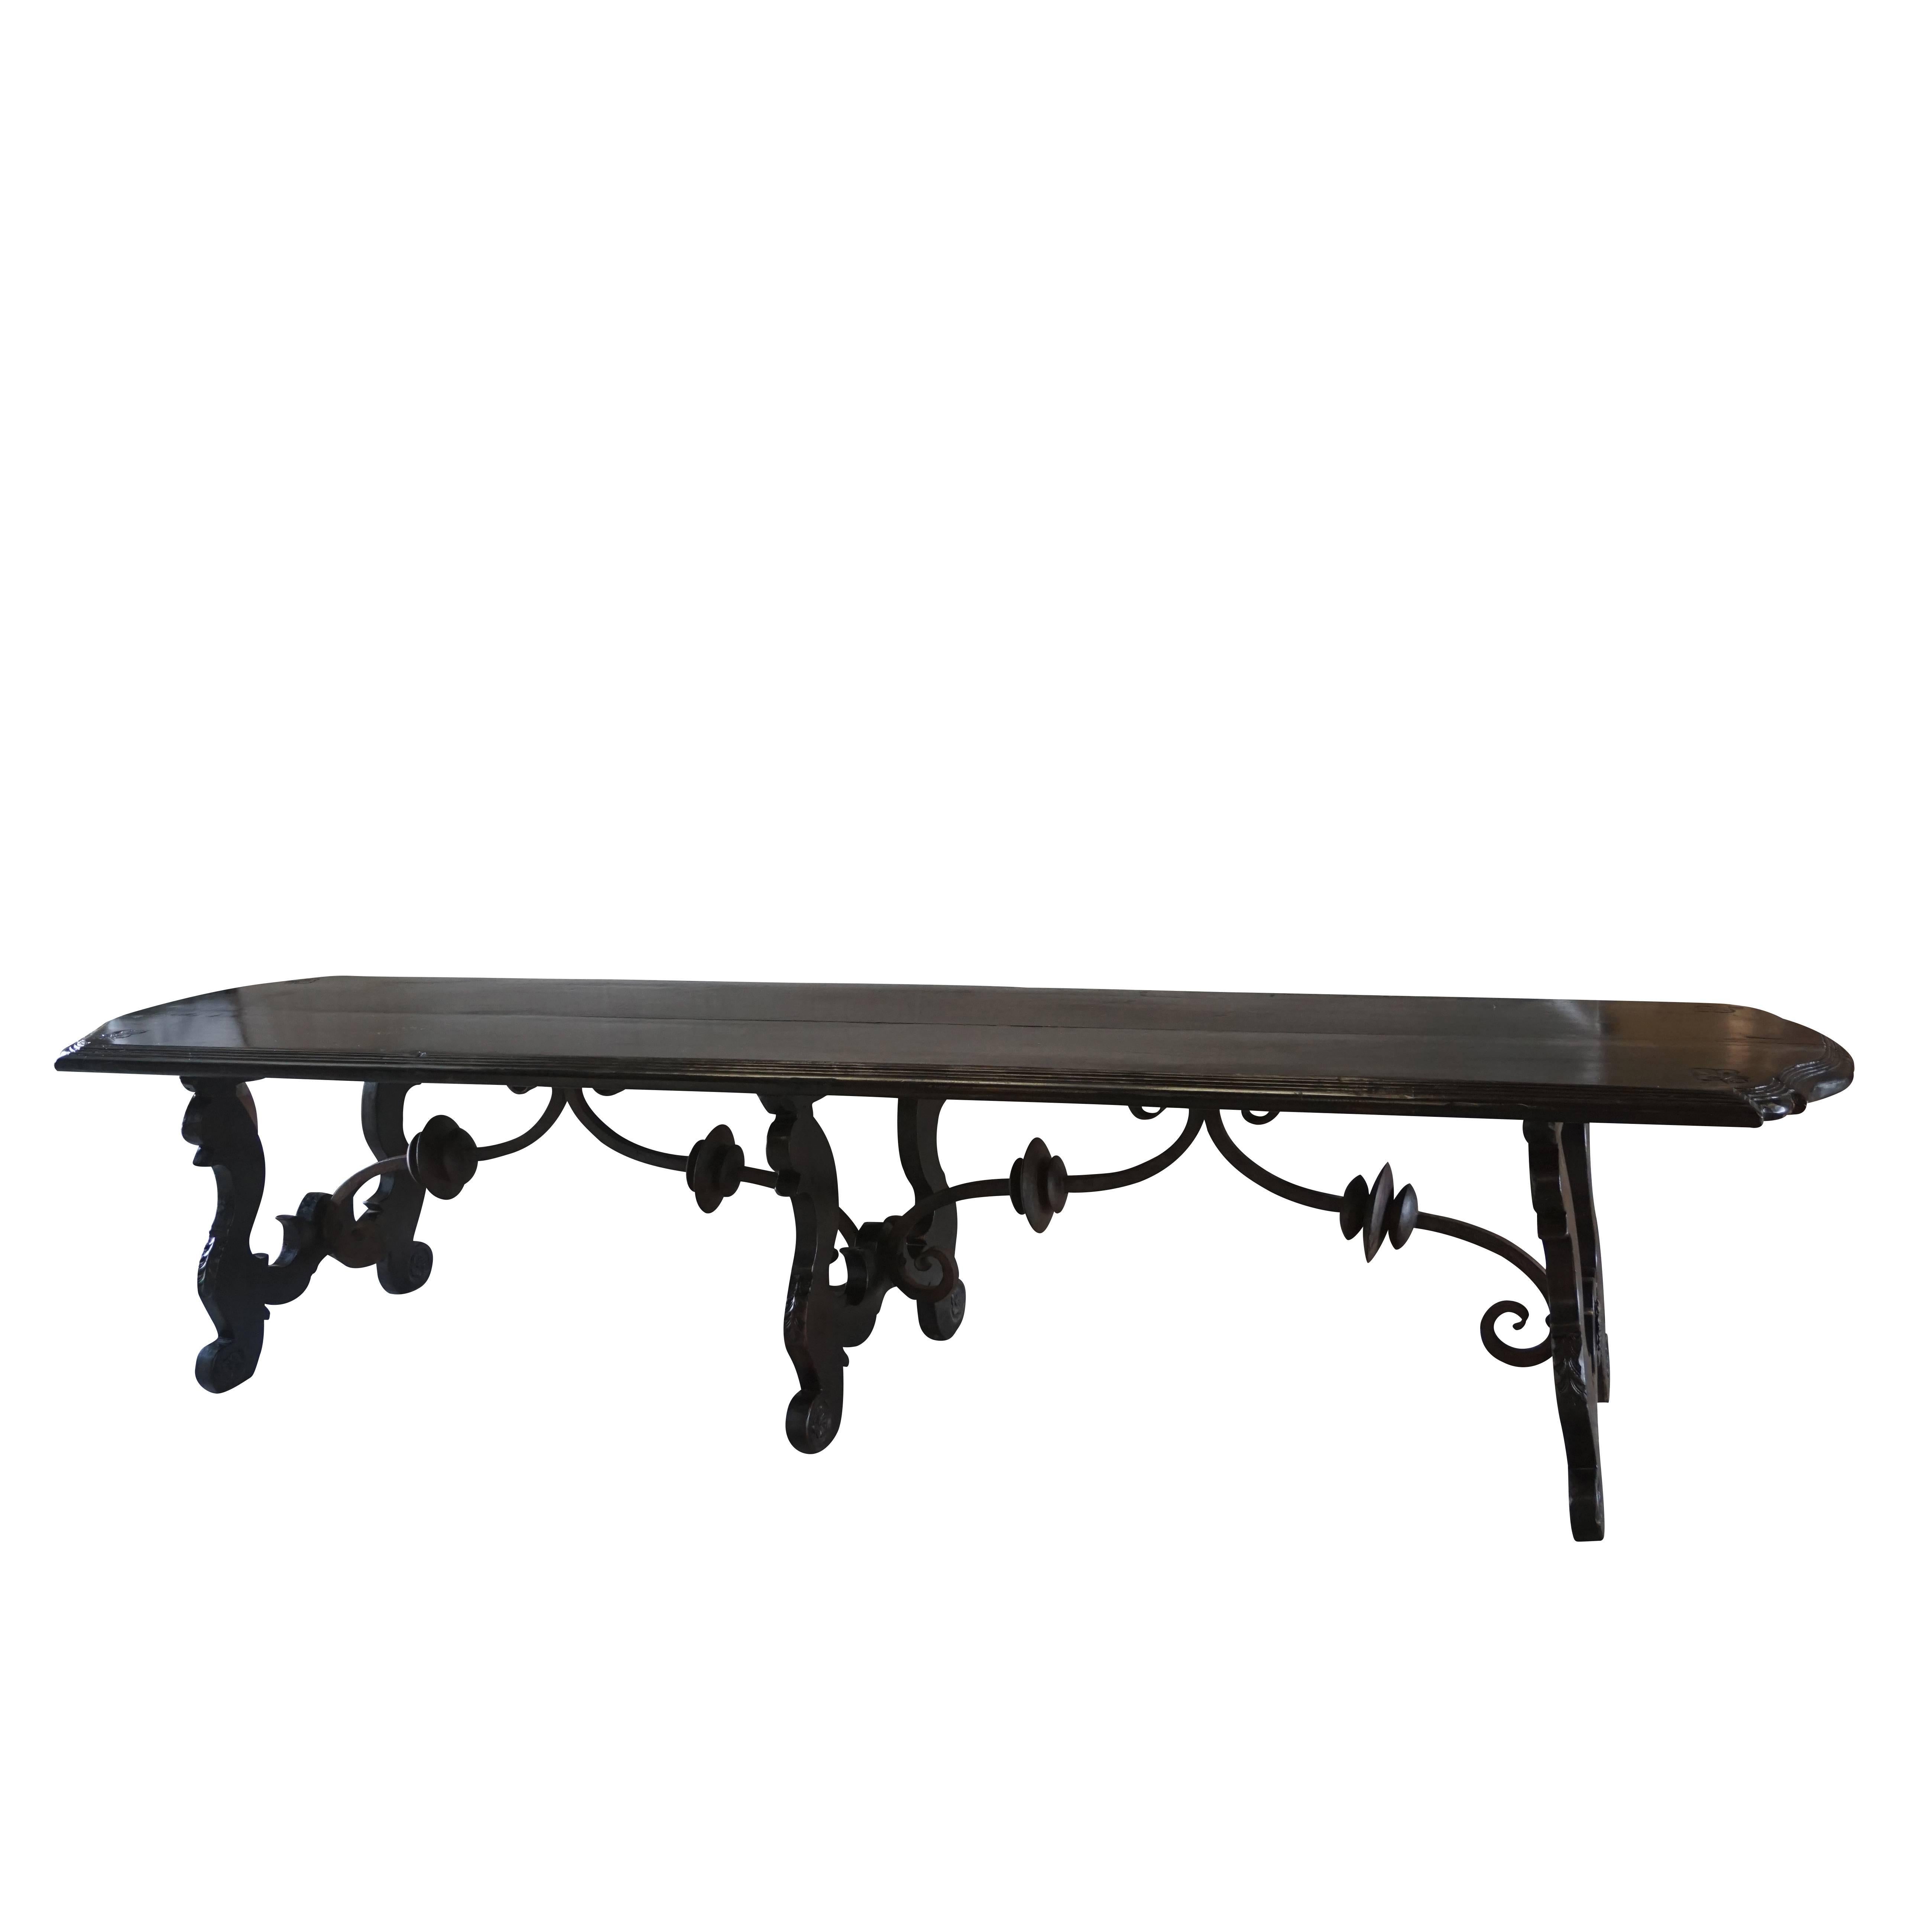 Exceptional large antique Tuscan refectory table in solid walnut with original scrolled hand-forged iron crossbars. The Lyra legs are hand-carved and supported by the beautifully worked hand-forged crossbars. The wooden tabletop is adorned with a